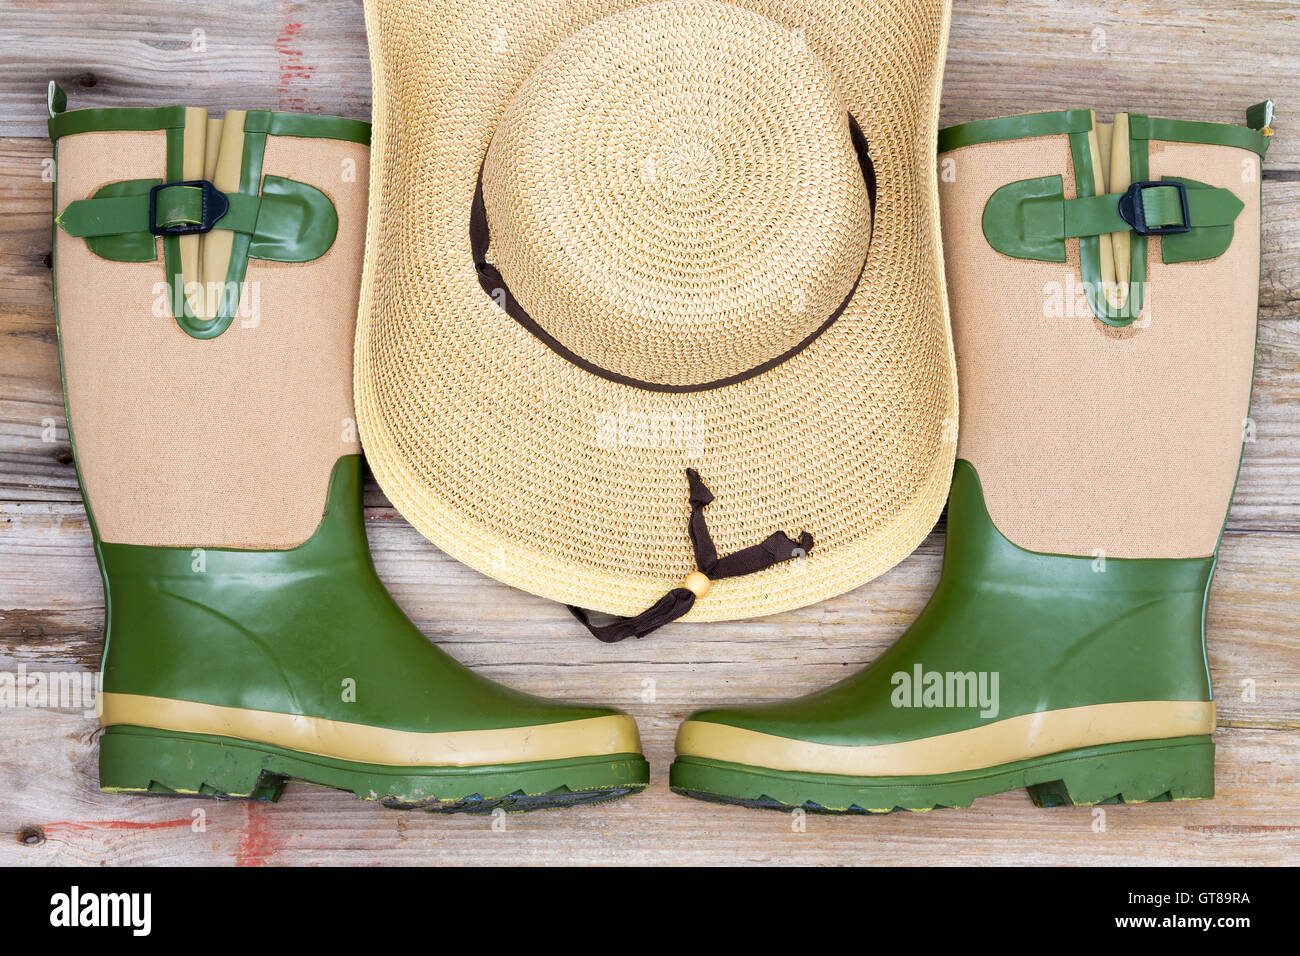 Garden fashion accessories with stylish rubber gumboots and wide brimmed straw hat in a symmetrical arrangement, view from above Stock Photo